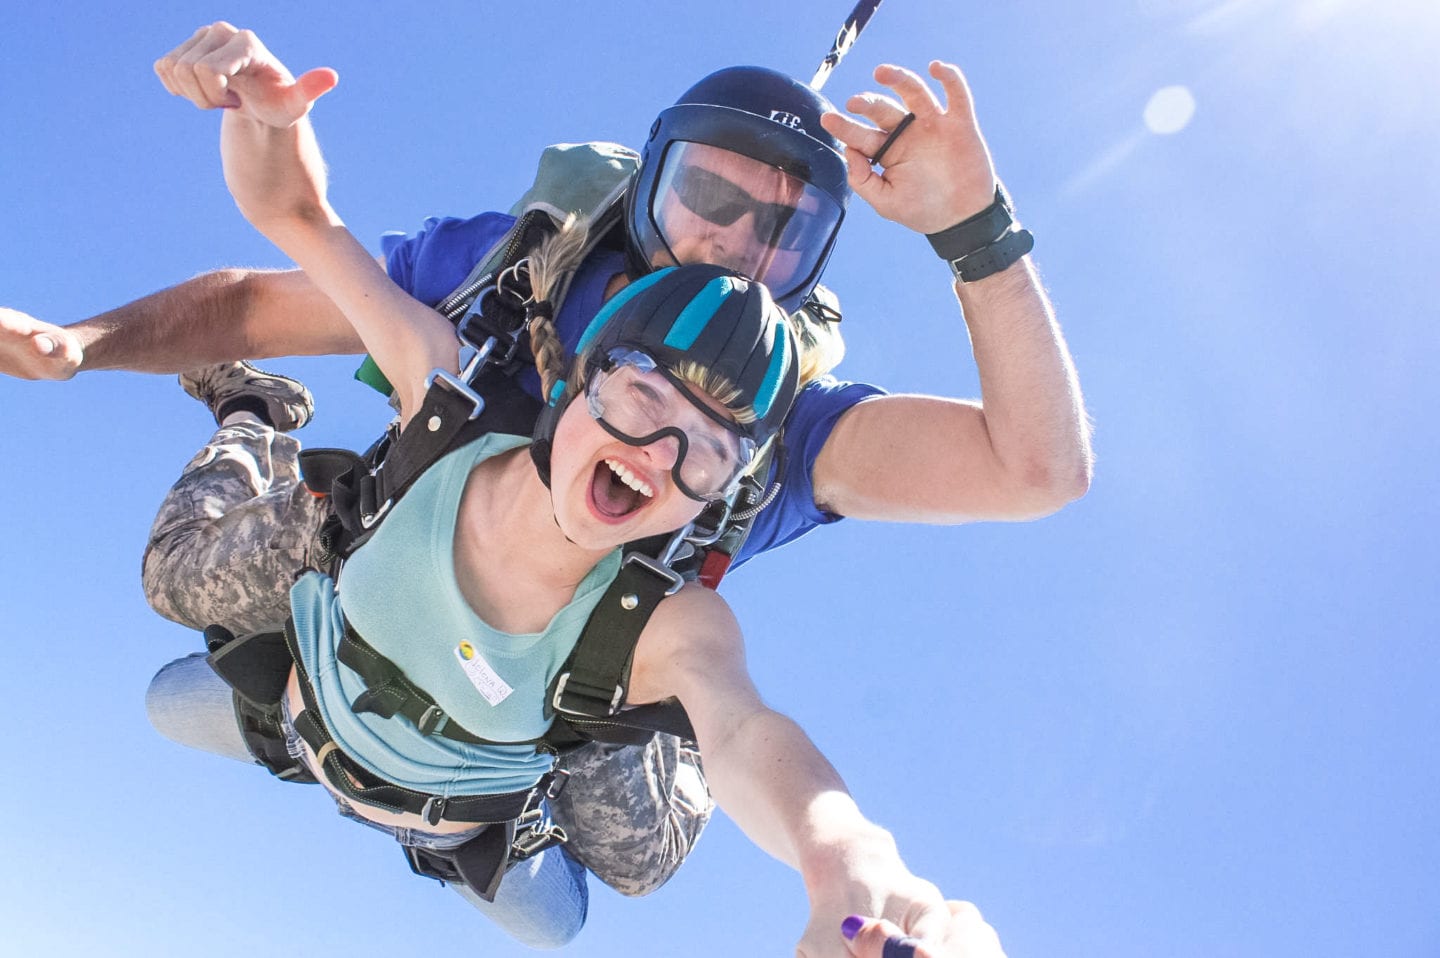 skydive lake elsinore How to Make the Most of Our Twenties and the "exploring years" twenty two year old blogger and photographer shares best tips on high risk, high reward and taking leaps of faith Helena Woods